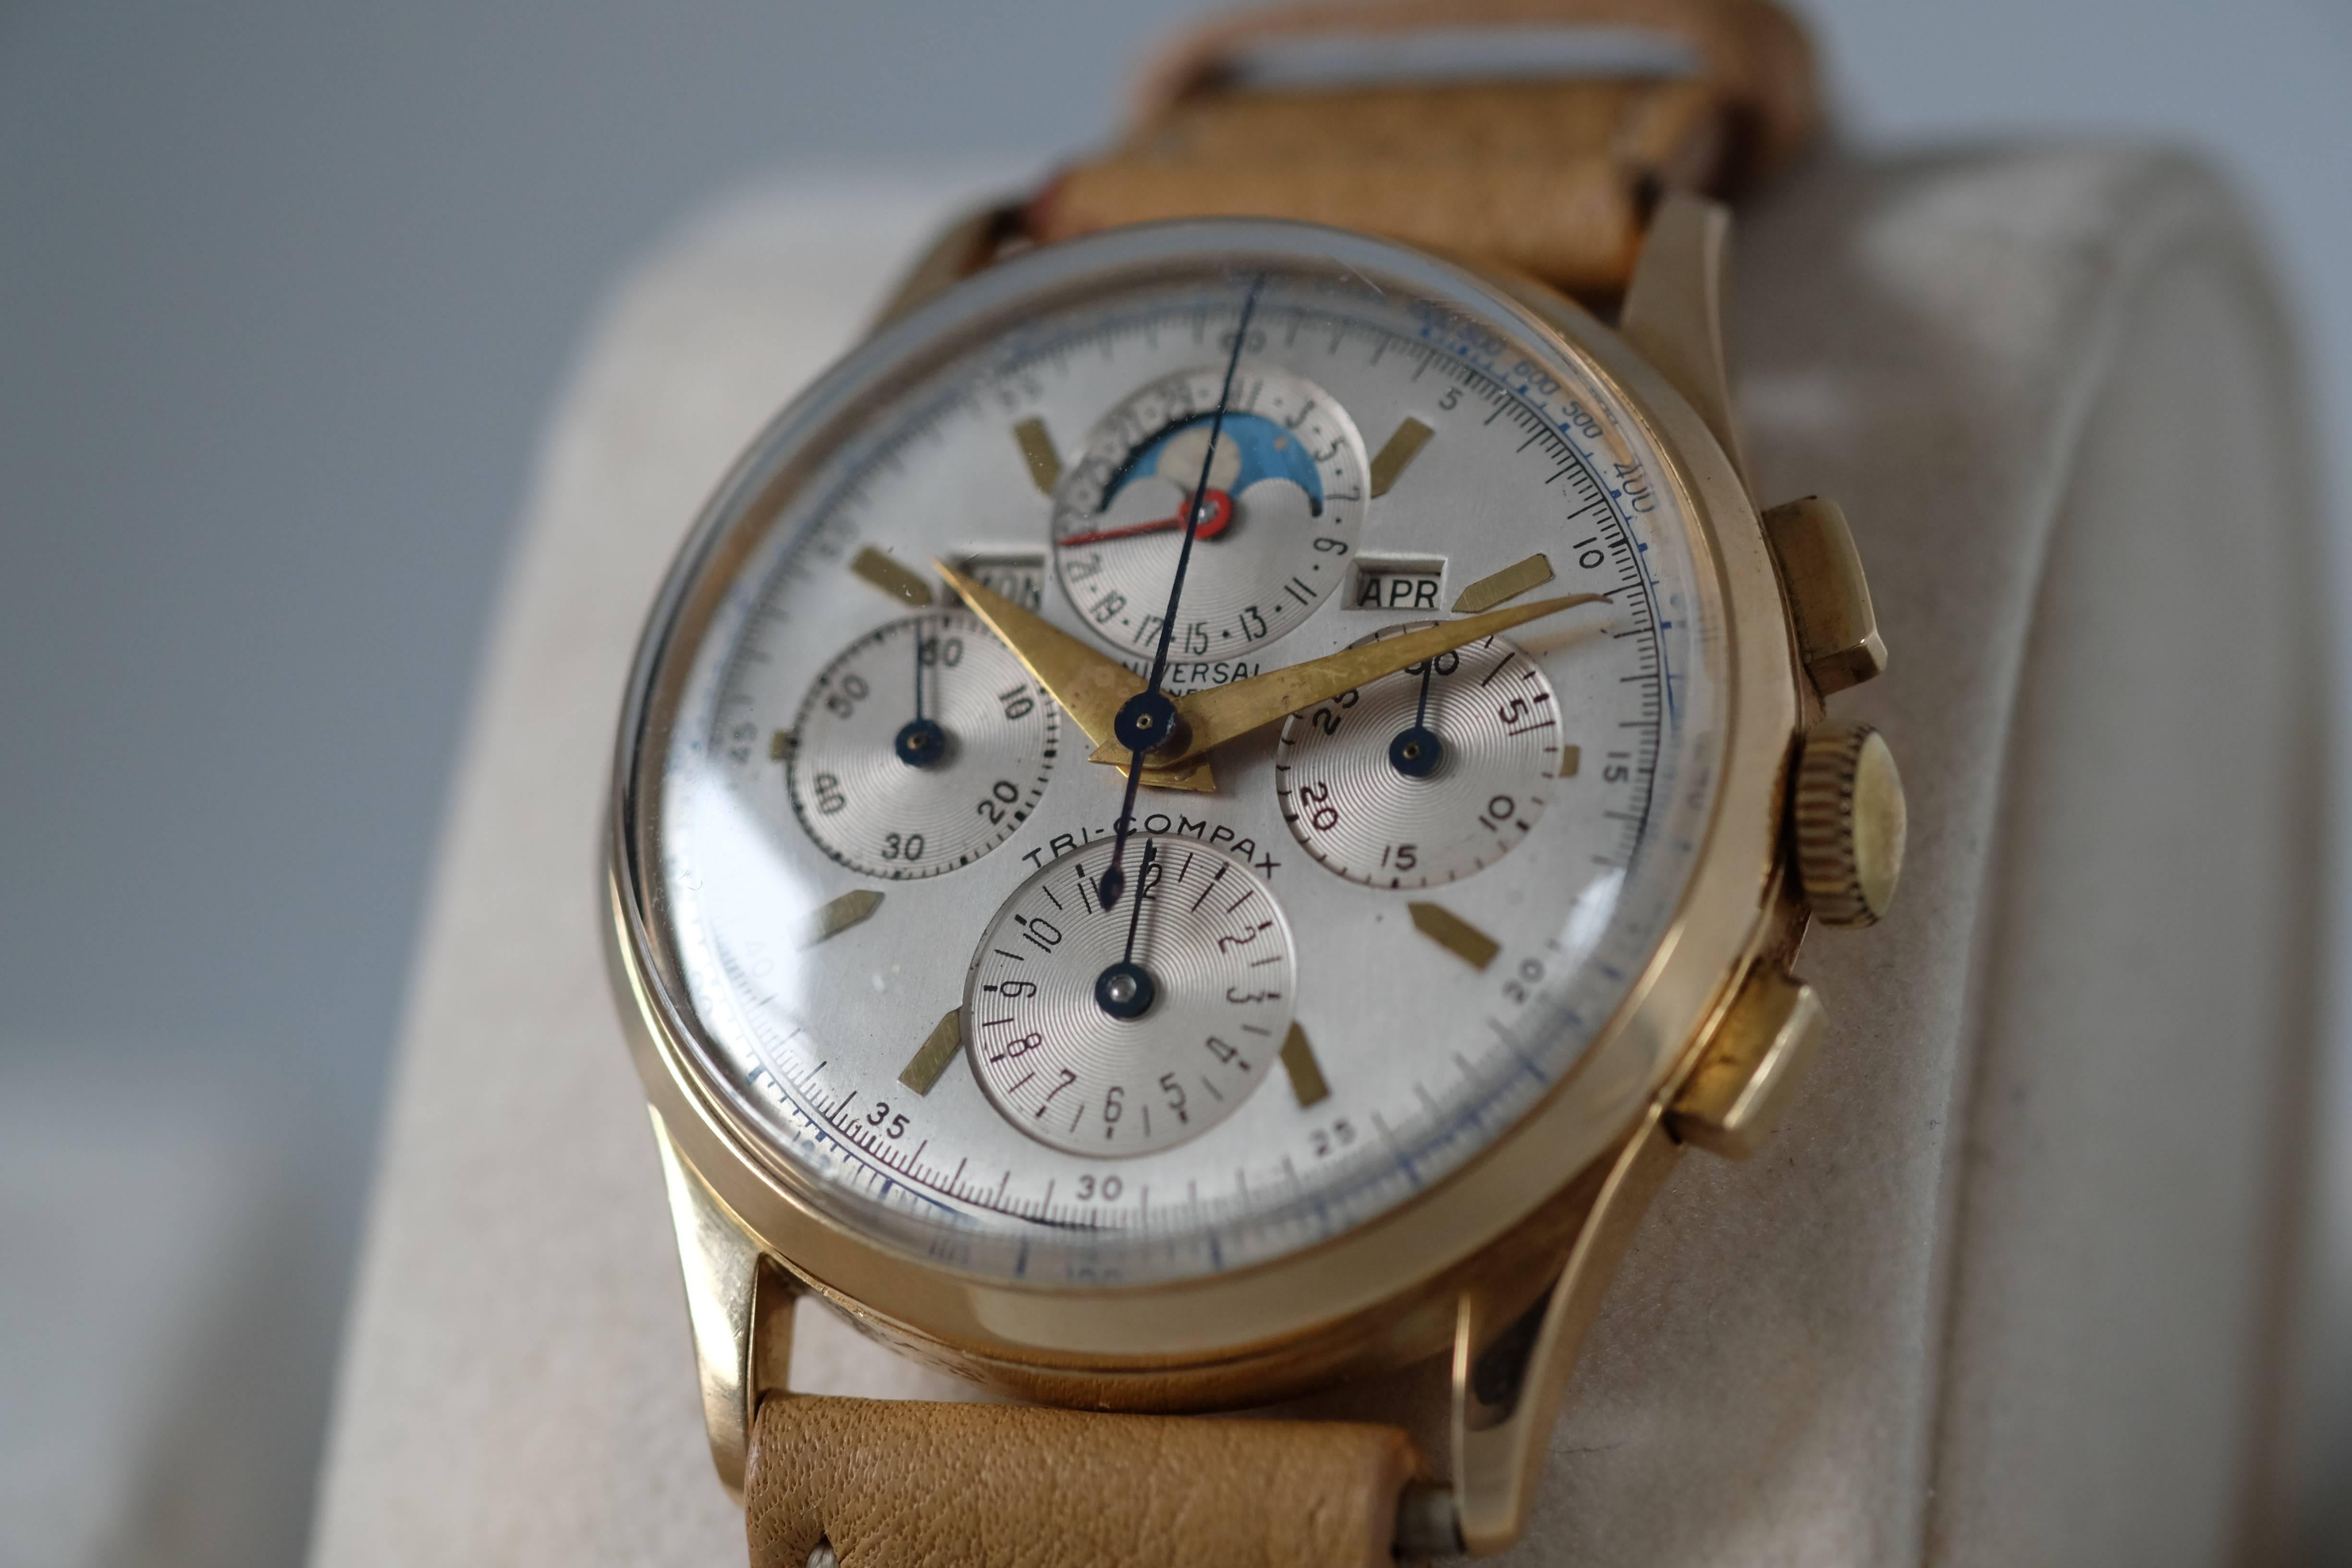 A 14k Gold Triple Calendar Chronograph from Universal Geneve

Model: Tri-Compax

Circa: 1950s

Movement: Cal. 481 gold-plated 17j manual-wind movement

Case: 36mm; 14k yellow gold with rectangular chronograph pushers at 2 and 4 o'clock;